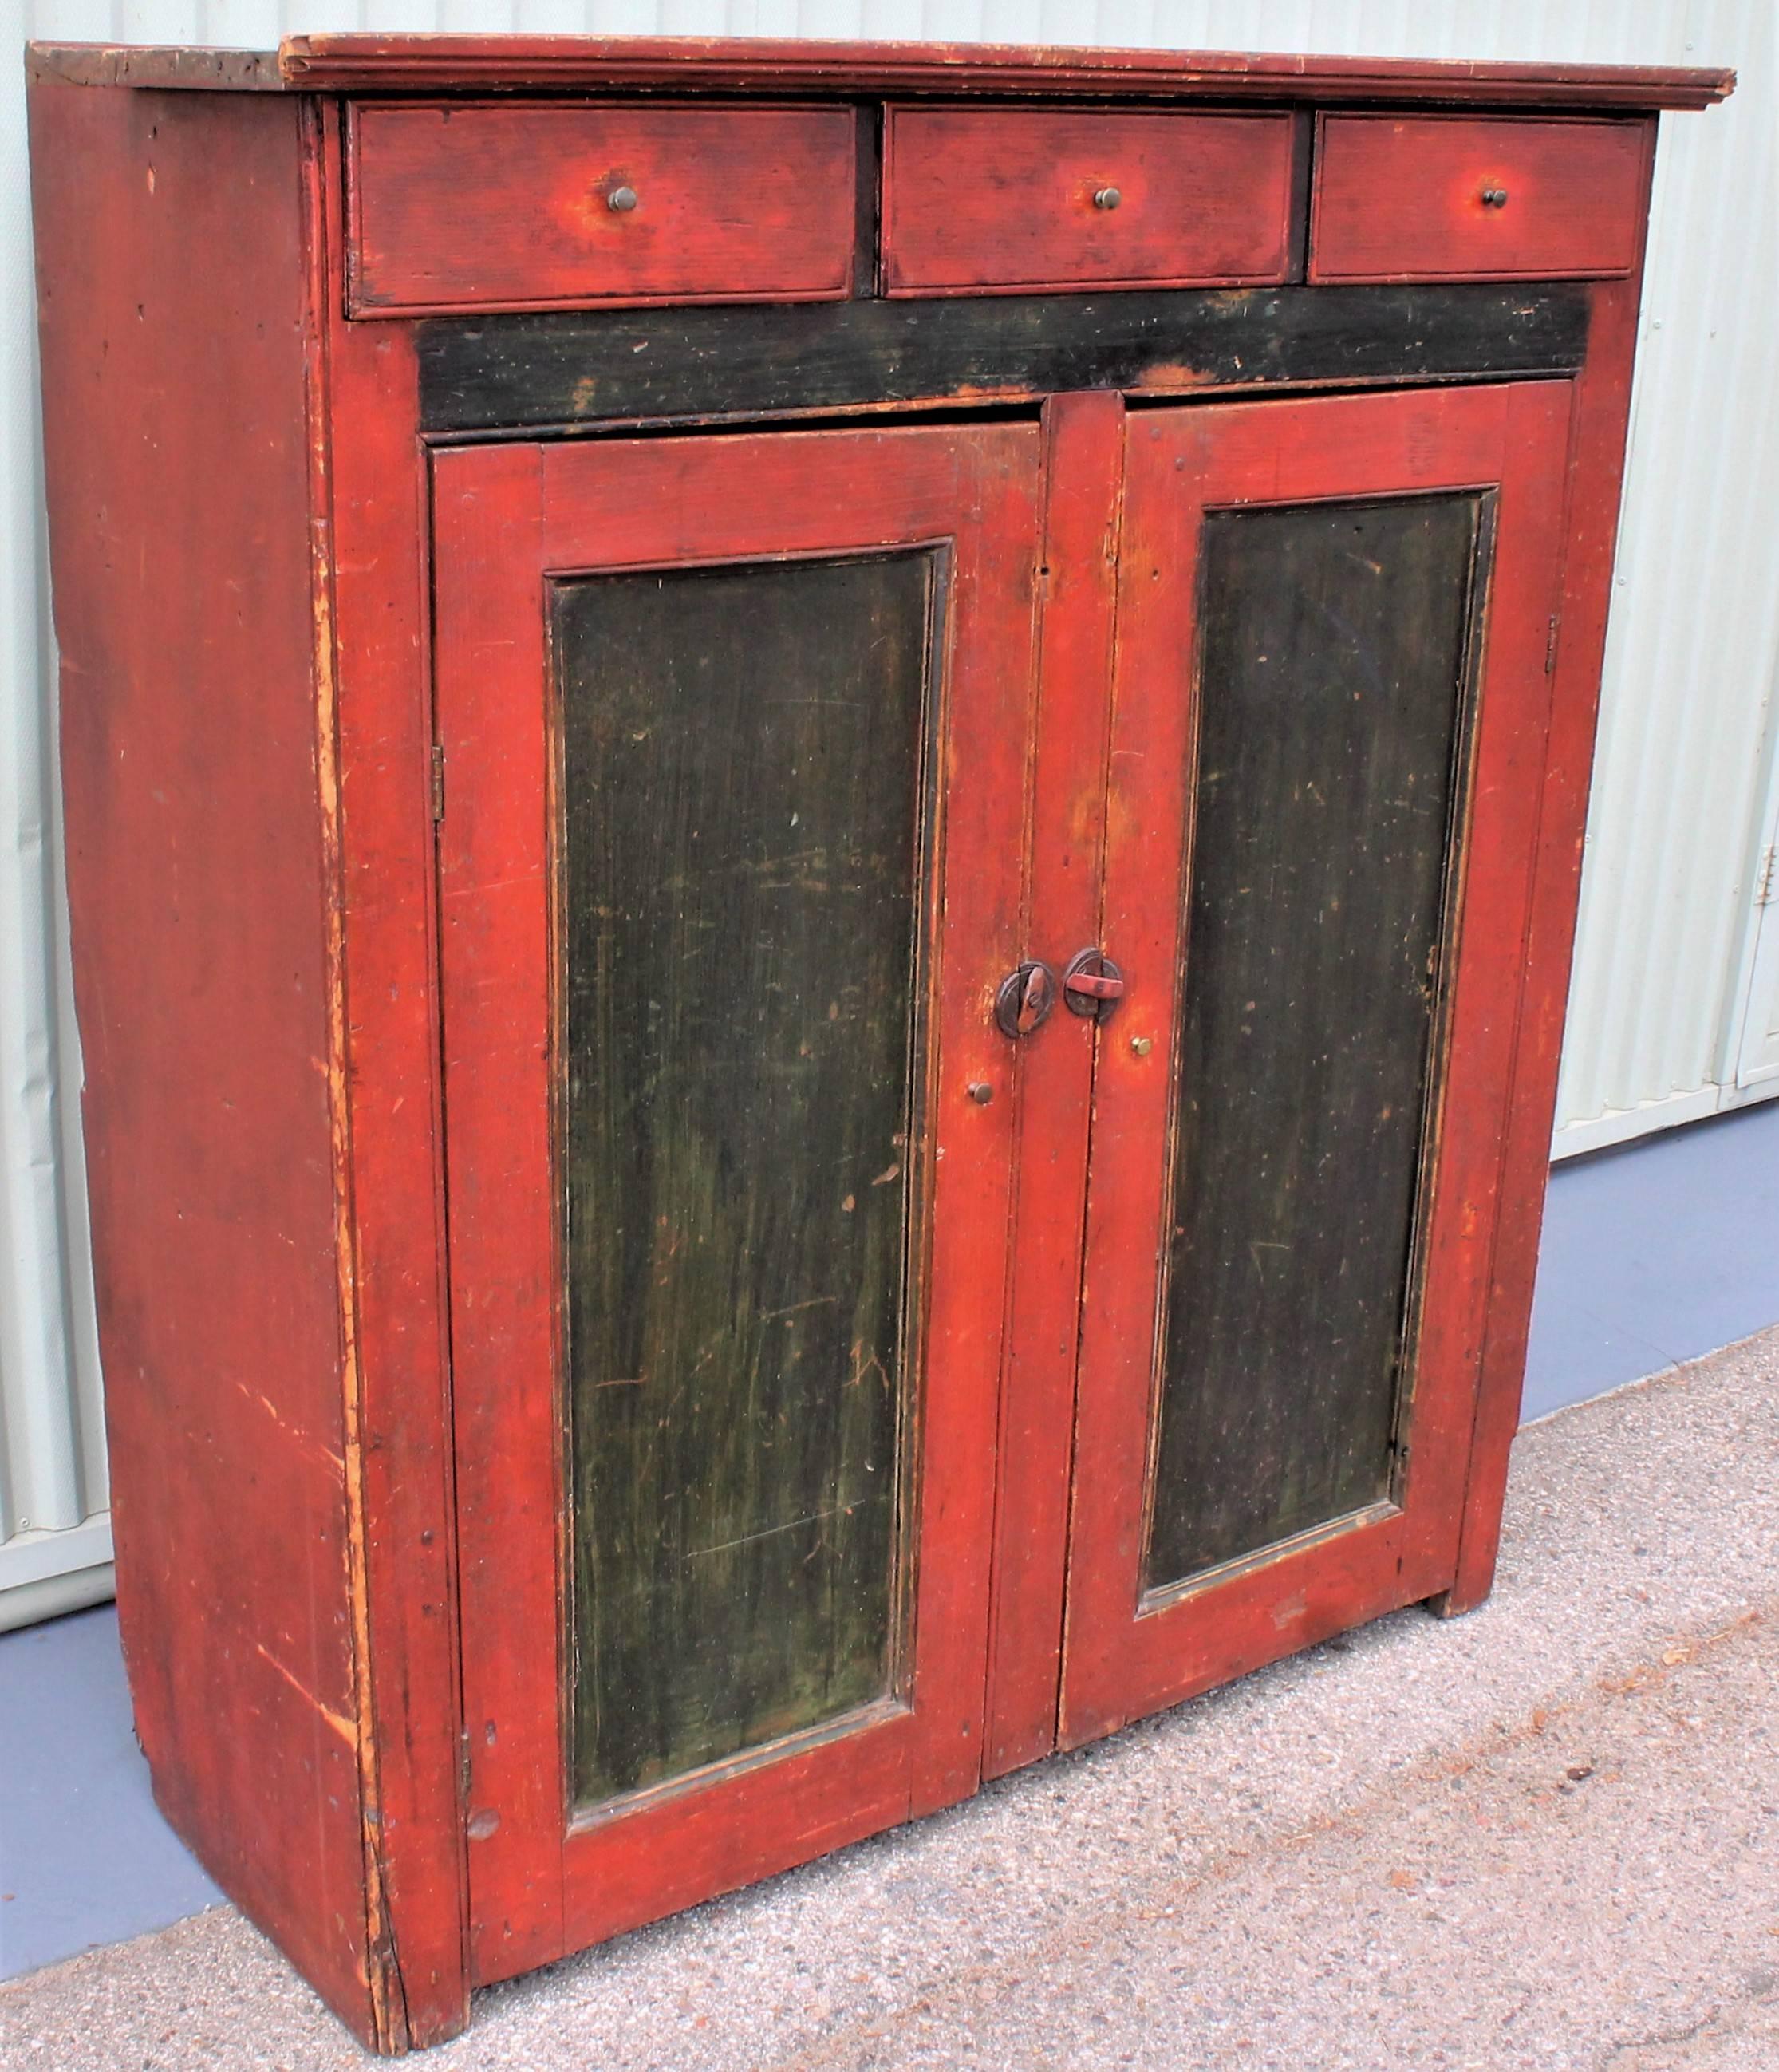 Original black and red painted three-drawer over two doors jelly cupboard from Vermont. This all original painted cupboard is in great condition and retains all original hardware. Special Fine small brass pulls on the dovetailed drawers. Early wood